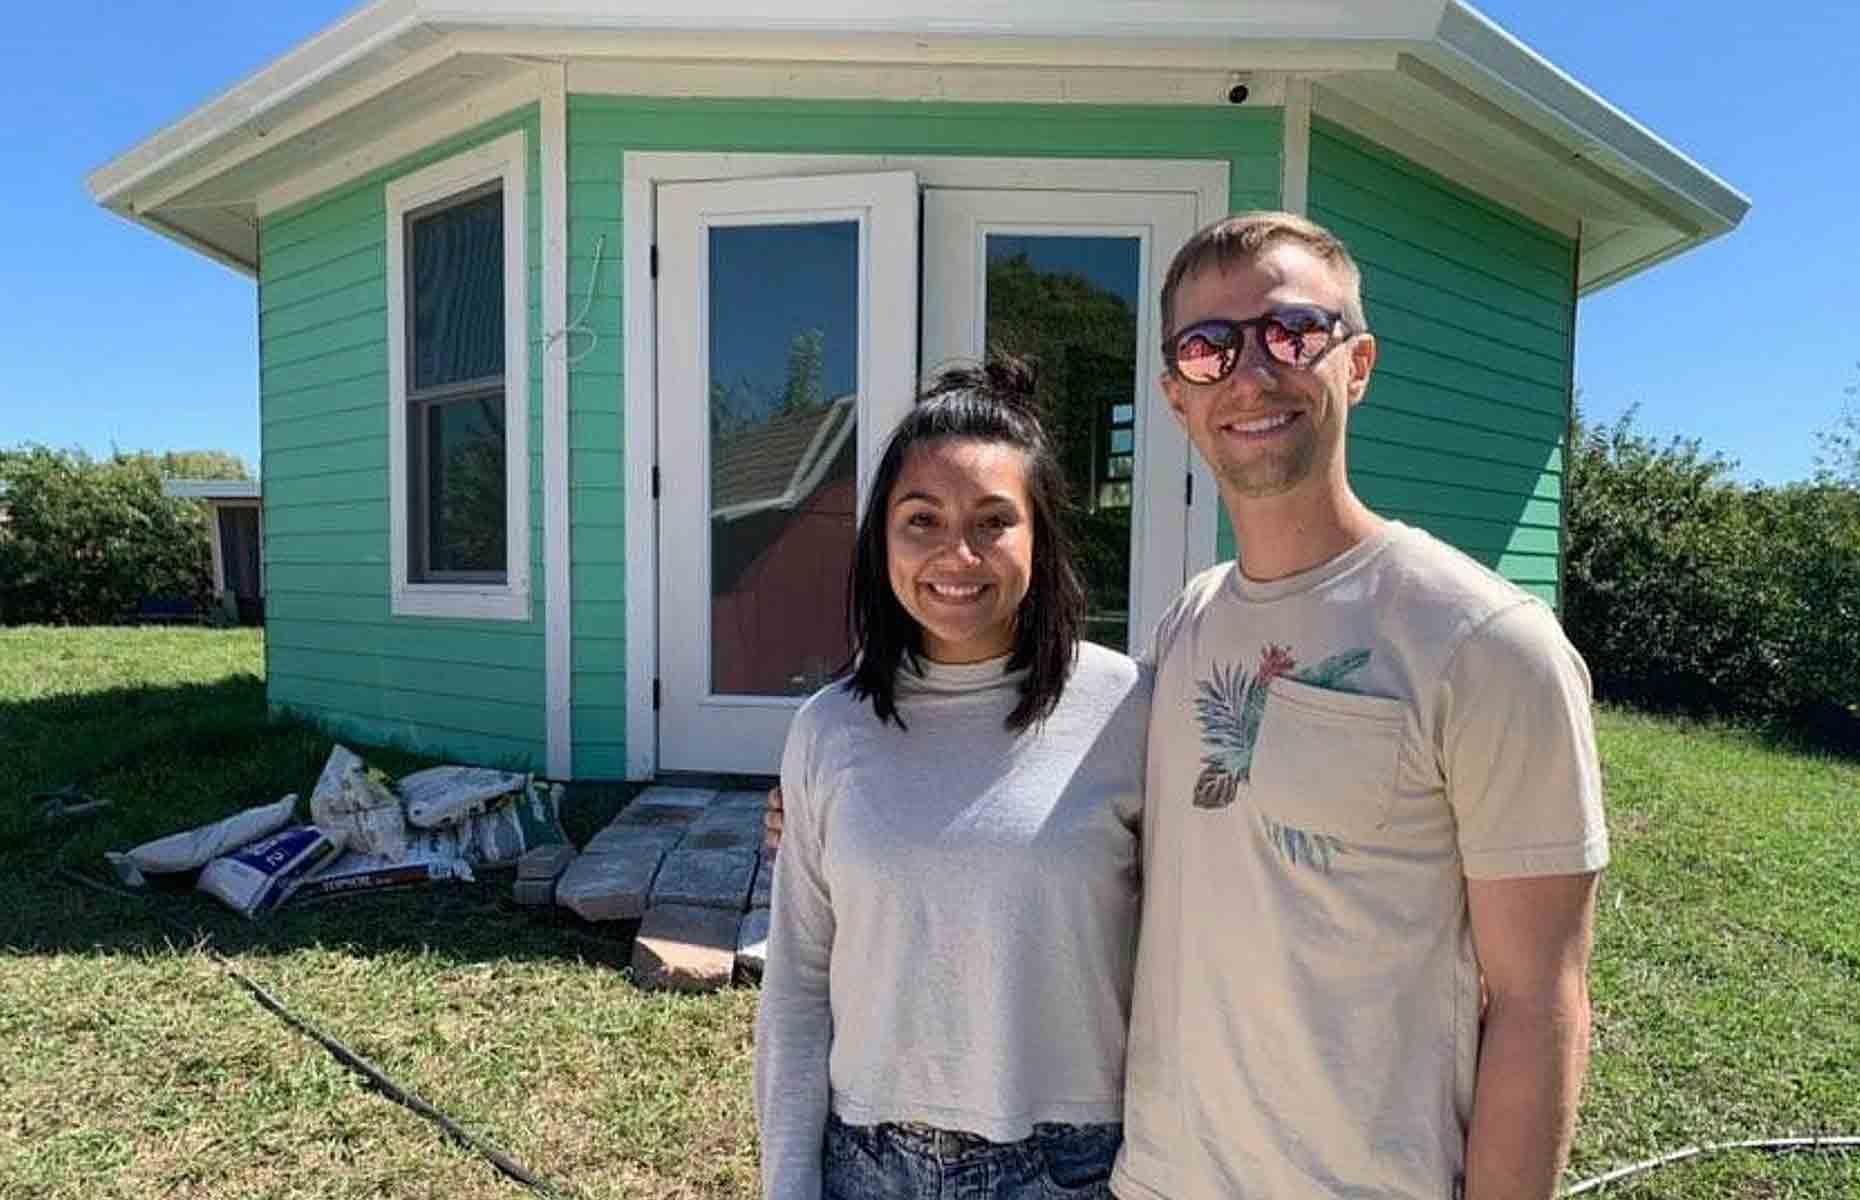 <p>For many first-time buyers, getting a foot on the property ladder is a daunting – and expensive – process. Instead of committing to decades of mortgage payments and hefty household bills, first-time buyers Tim Davidson and Sam Cosner decided to downsize to achieve their dreams of homeownership. </p>  <p>Their incredible adventure took them from fitting out their first tiny home to building a private tiny house island off the west coast of Florida. </p>